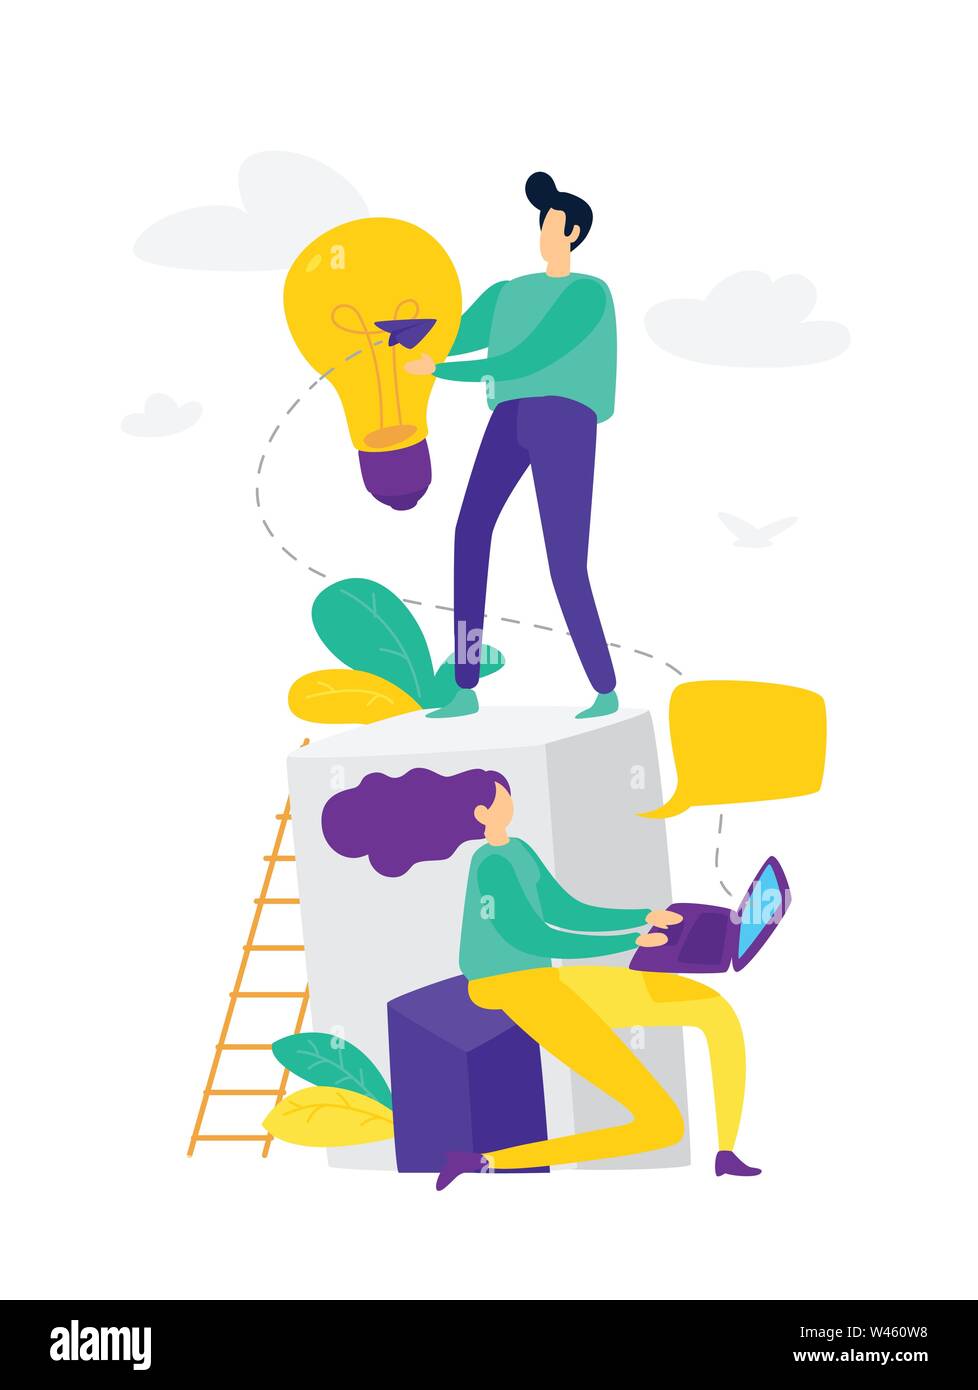 Vector illustration, online assistant at work, online promotion, remote work manager, search for new ideas, teamwork in a company, brainstorming. Stock Vector